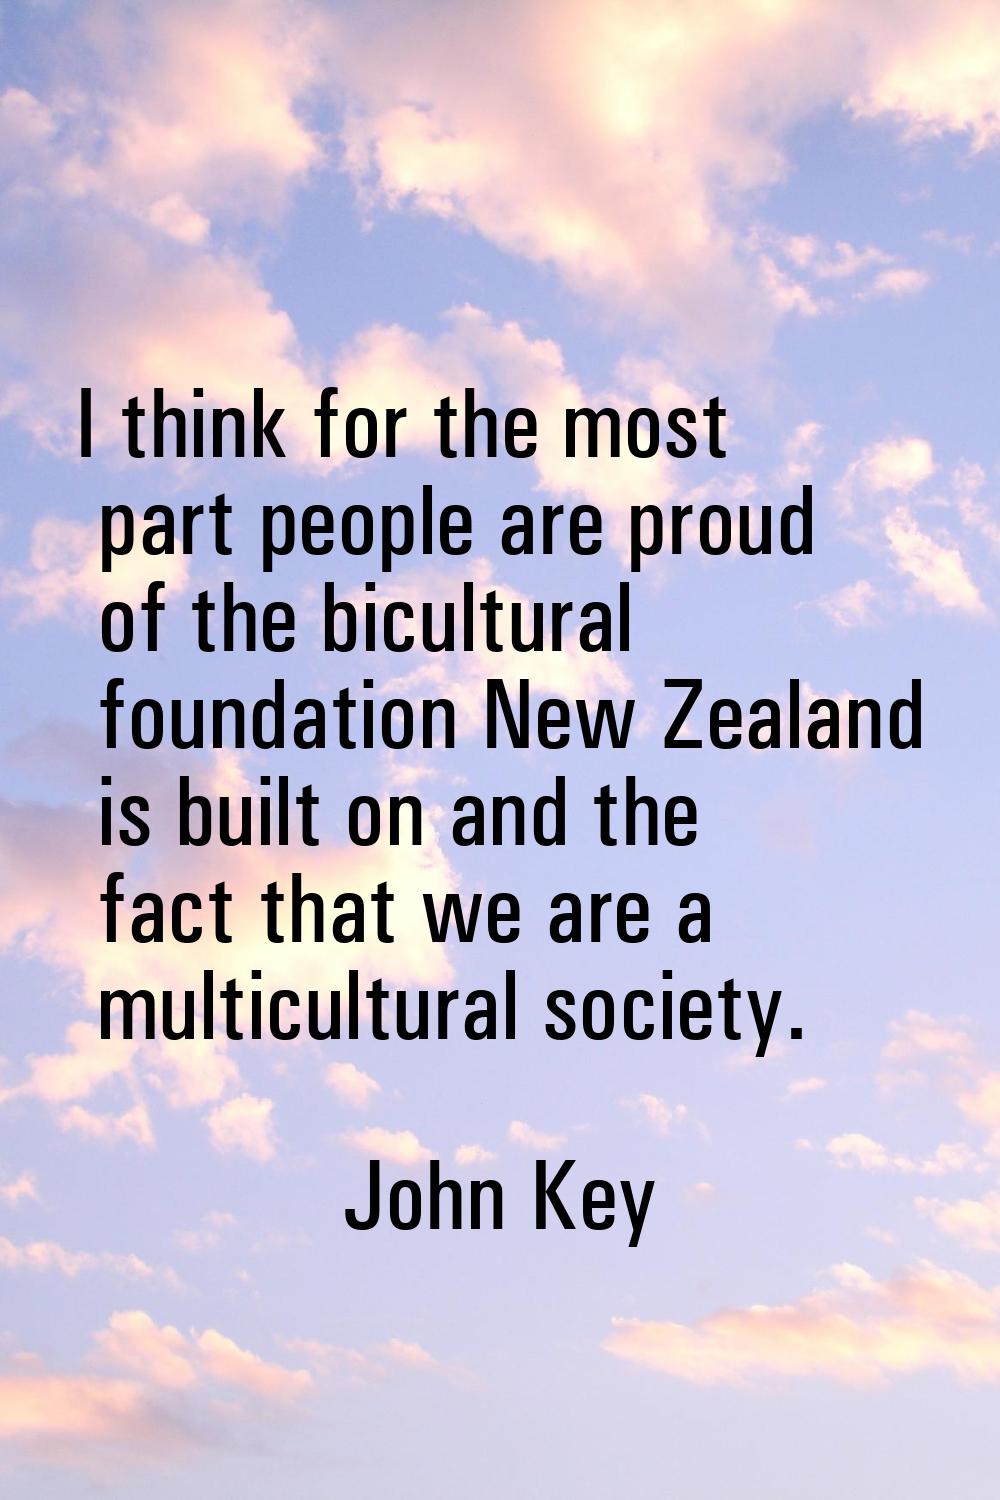 I think for the most part people are proud of the bicultural foundation New Zealand is built on and